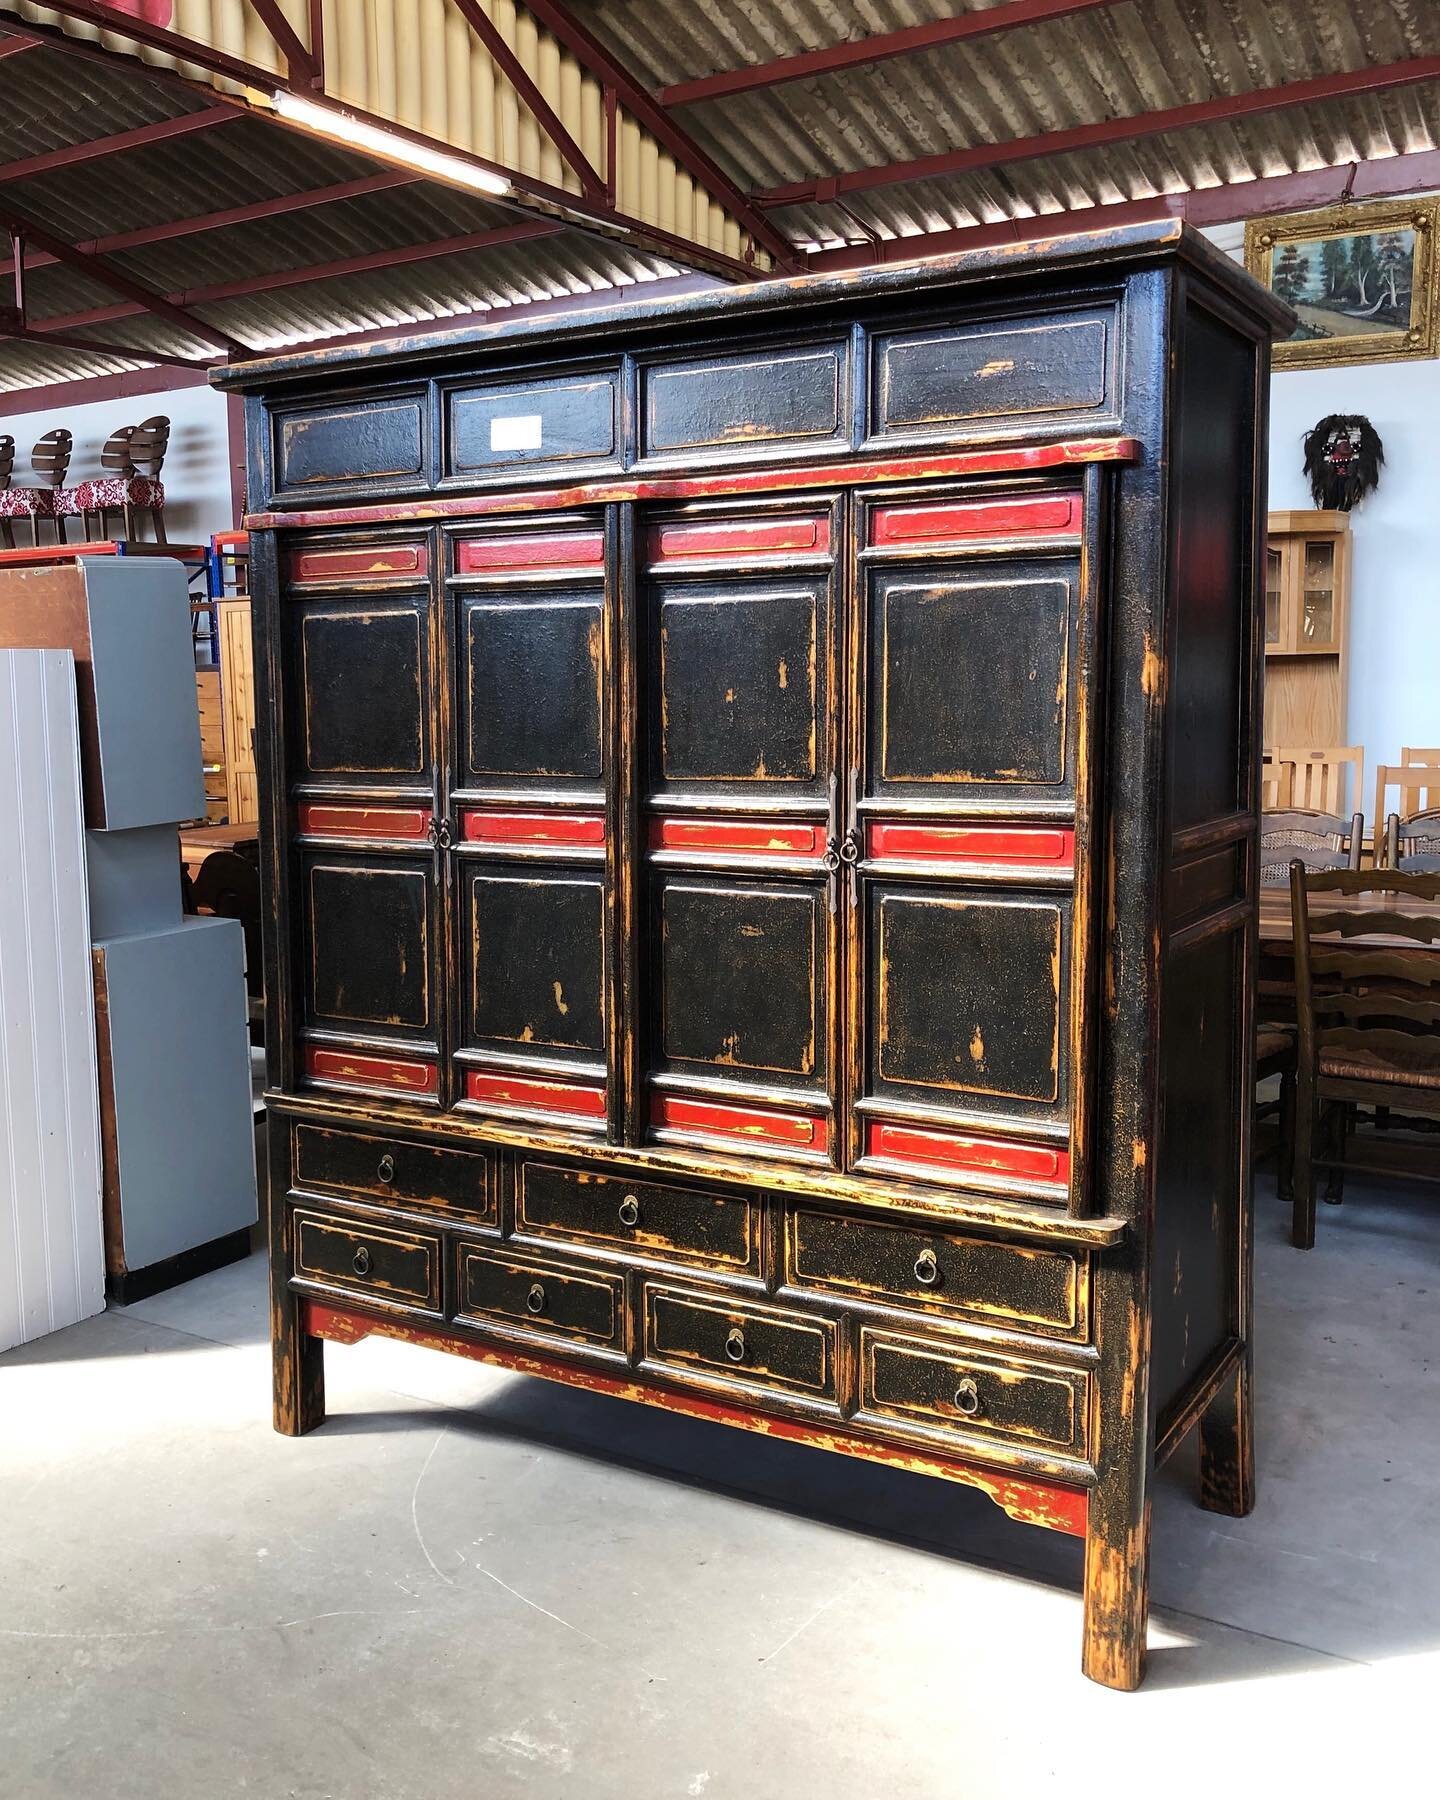 A beautiful Chinese Lacquer Cabinet. The perfect centerpiece for a bedroom or living room.

Price: R16 500

Width: 1660mm
Depth: 660mm
Height: 2000mm

Stop by for a browse &amp; a coffee, we&rsquo;re open Mon - Fri, 9am - 5pm and Saturdays from 9am -